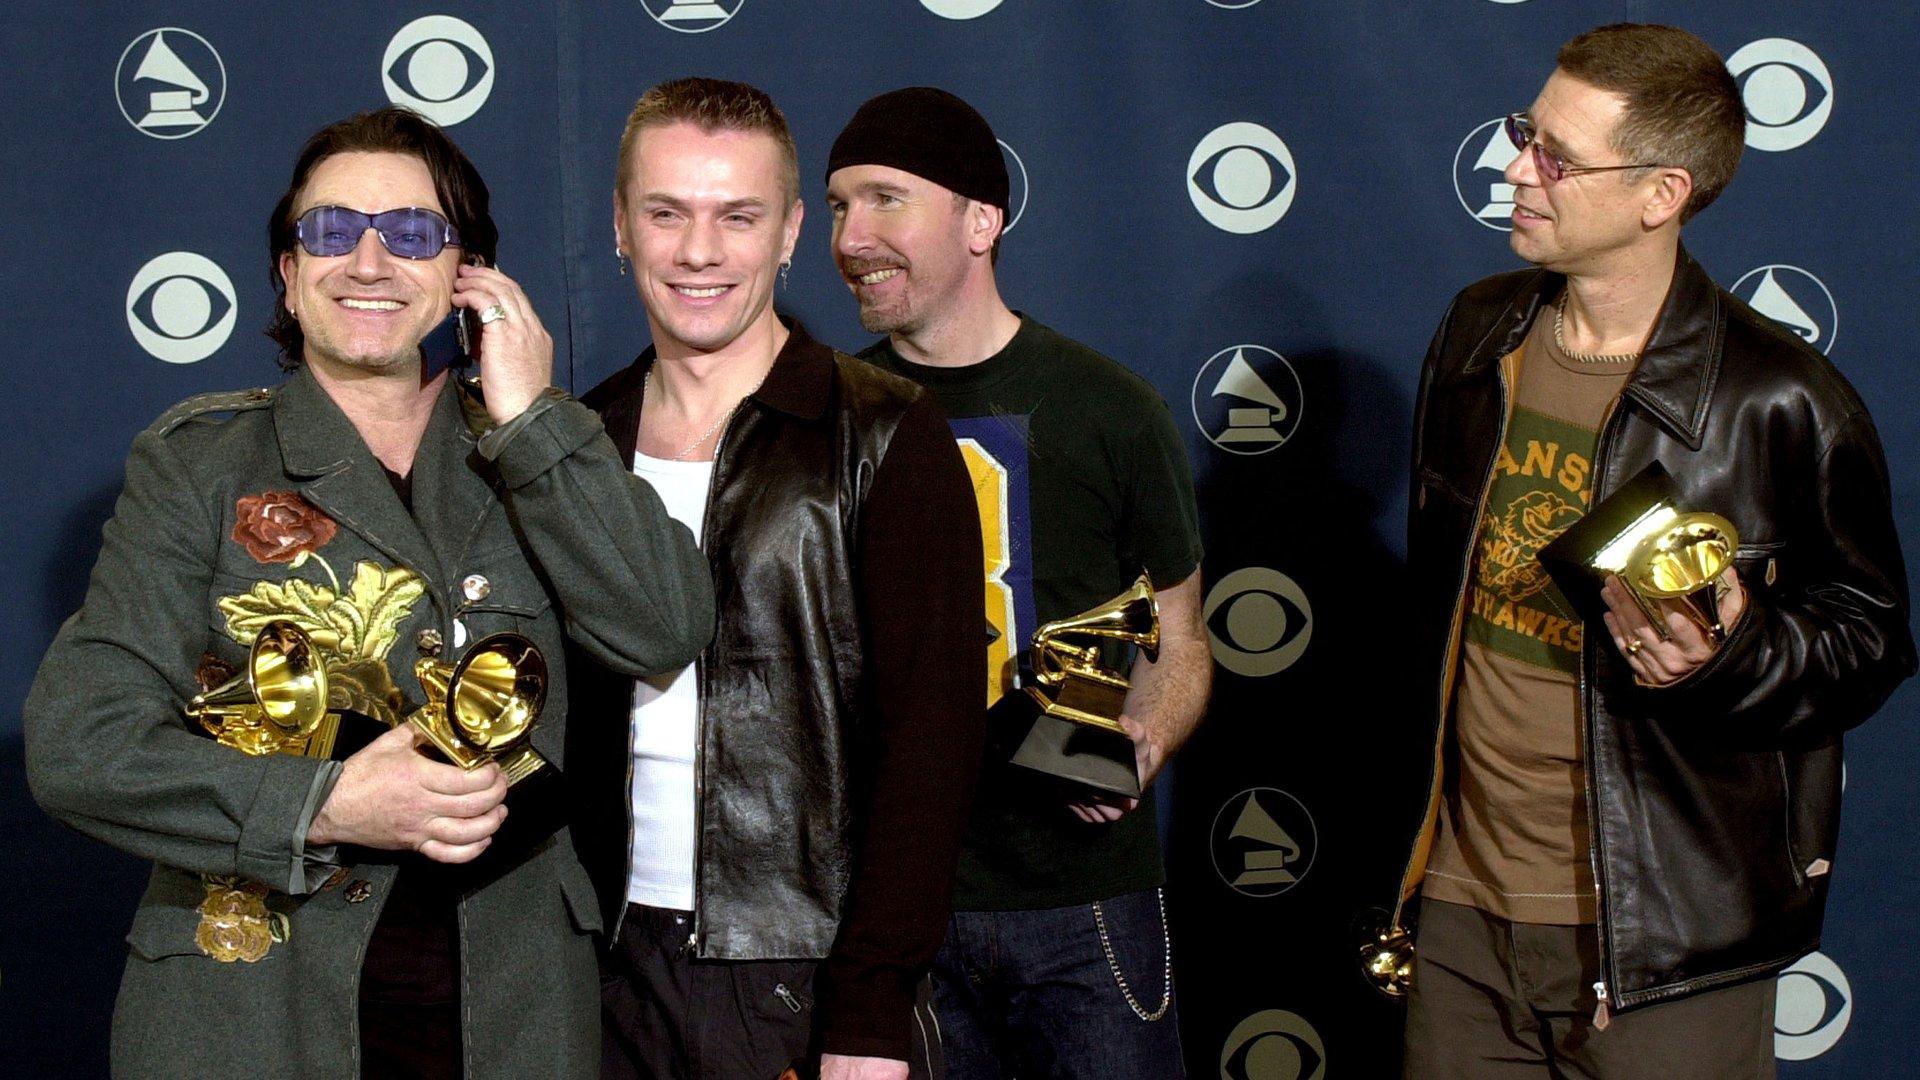  U2 pose with GRAMMYs backstage at the 43rd GRAMMY Awards in 2001